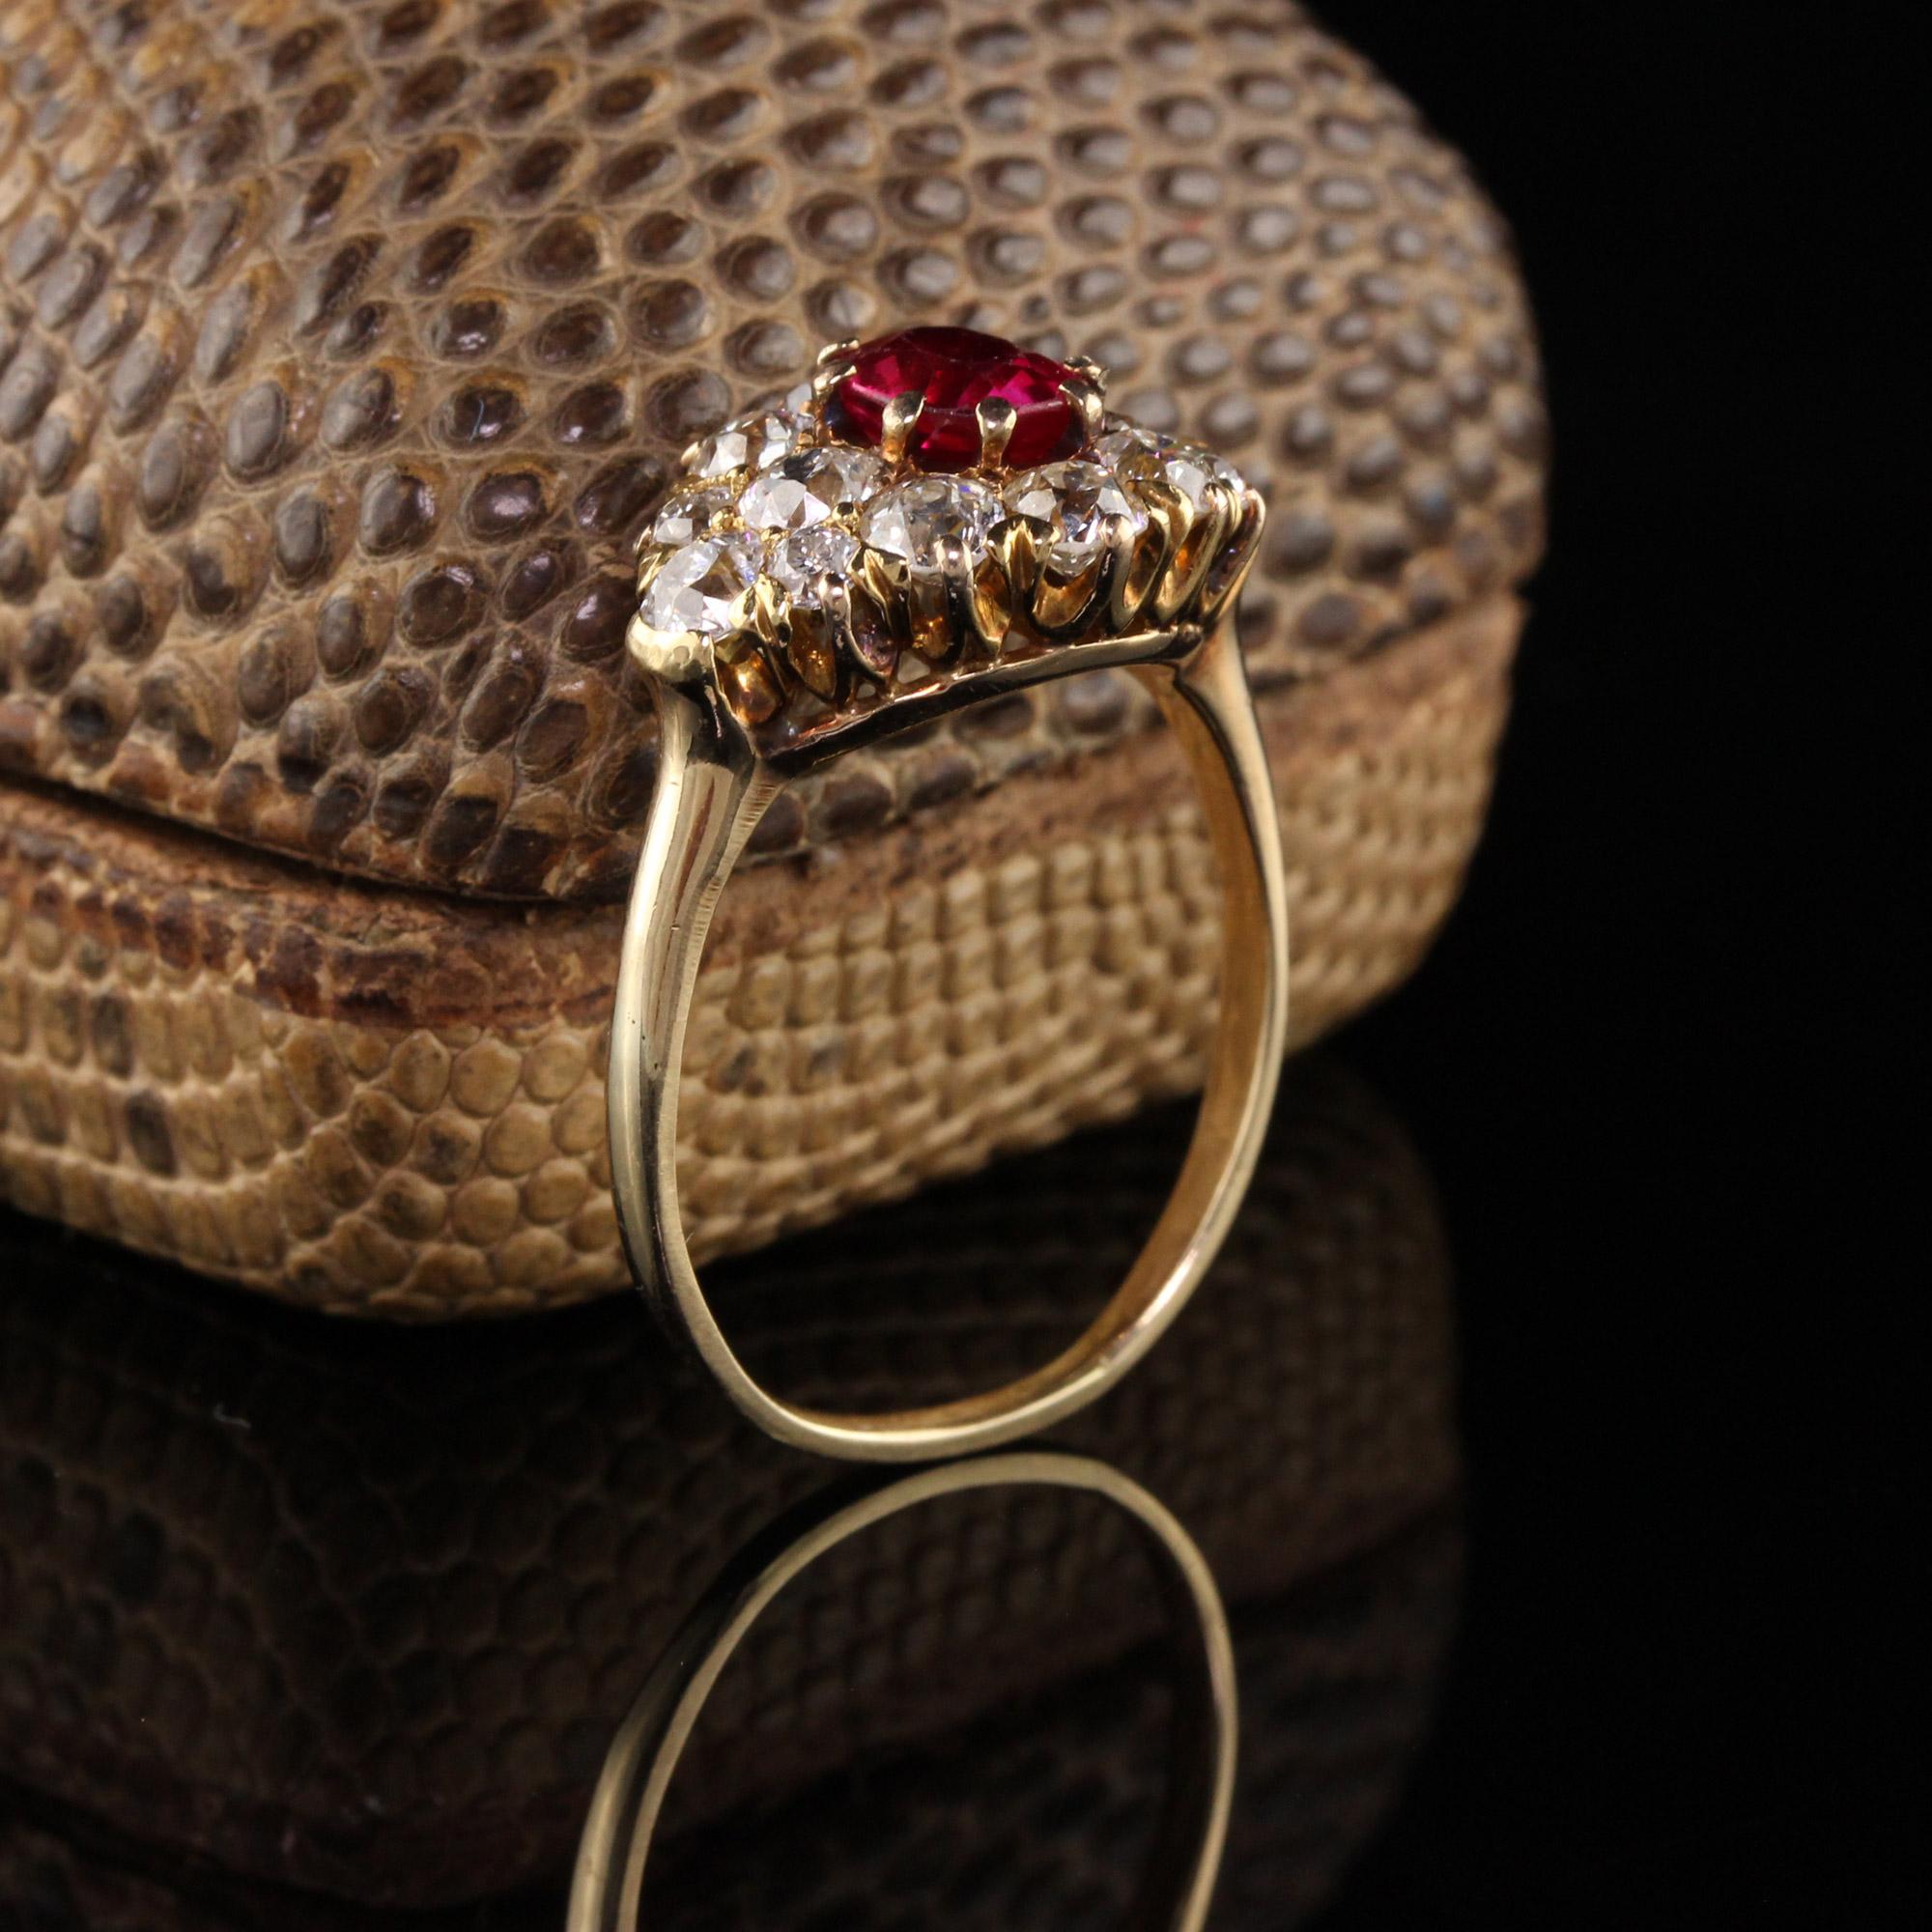 Beautiful Antique Art Deco 14K Yellow Gold Old European Diamond Ruby Ring. This amazing ring features chunky old european cut diamonds surrounding a synthetic ruby center stone. Synthetic rubies were commonly used in many antique pieces due to the